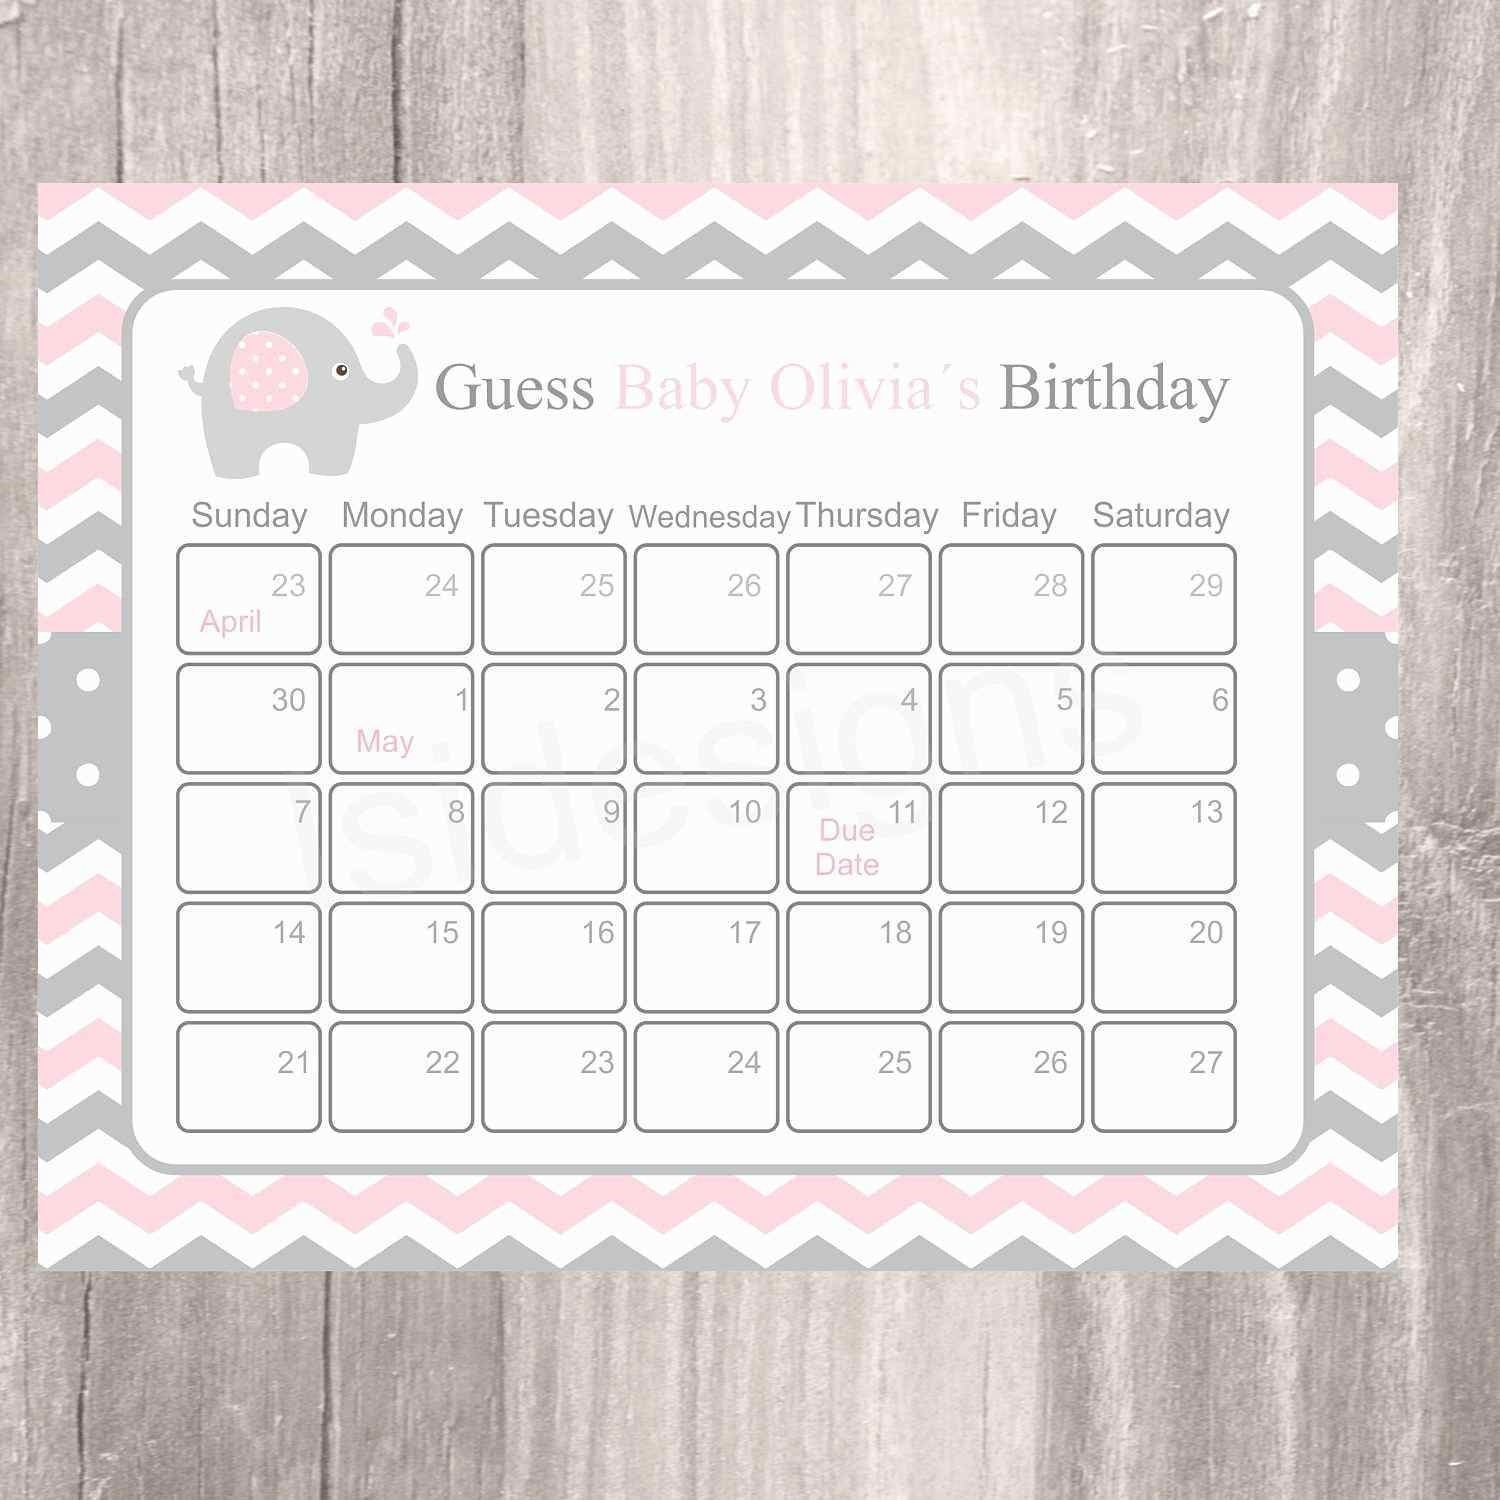 Guess The Date Baby Shower Template Word | Calendar Template 2021-August 2021 Free Printable Baby Due Date Calendar